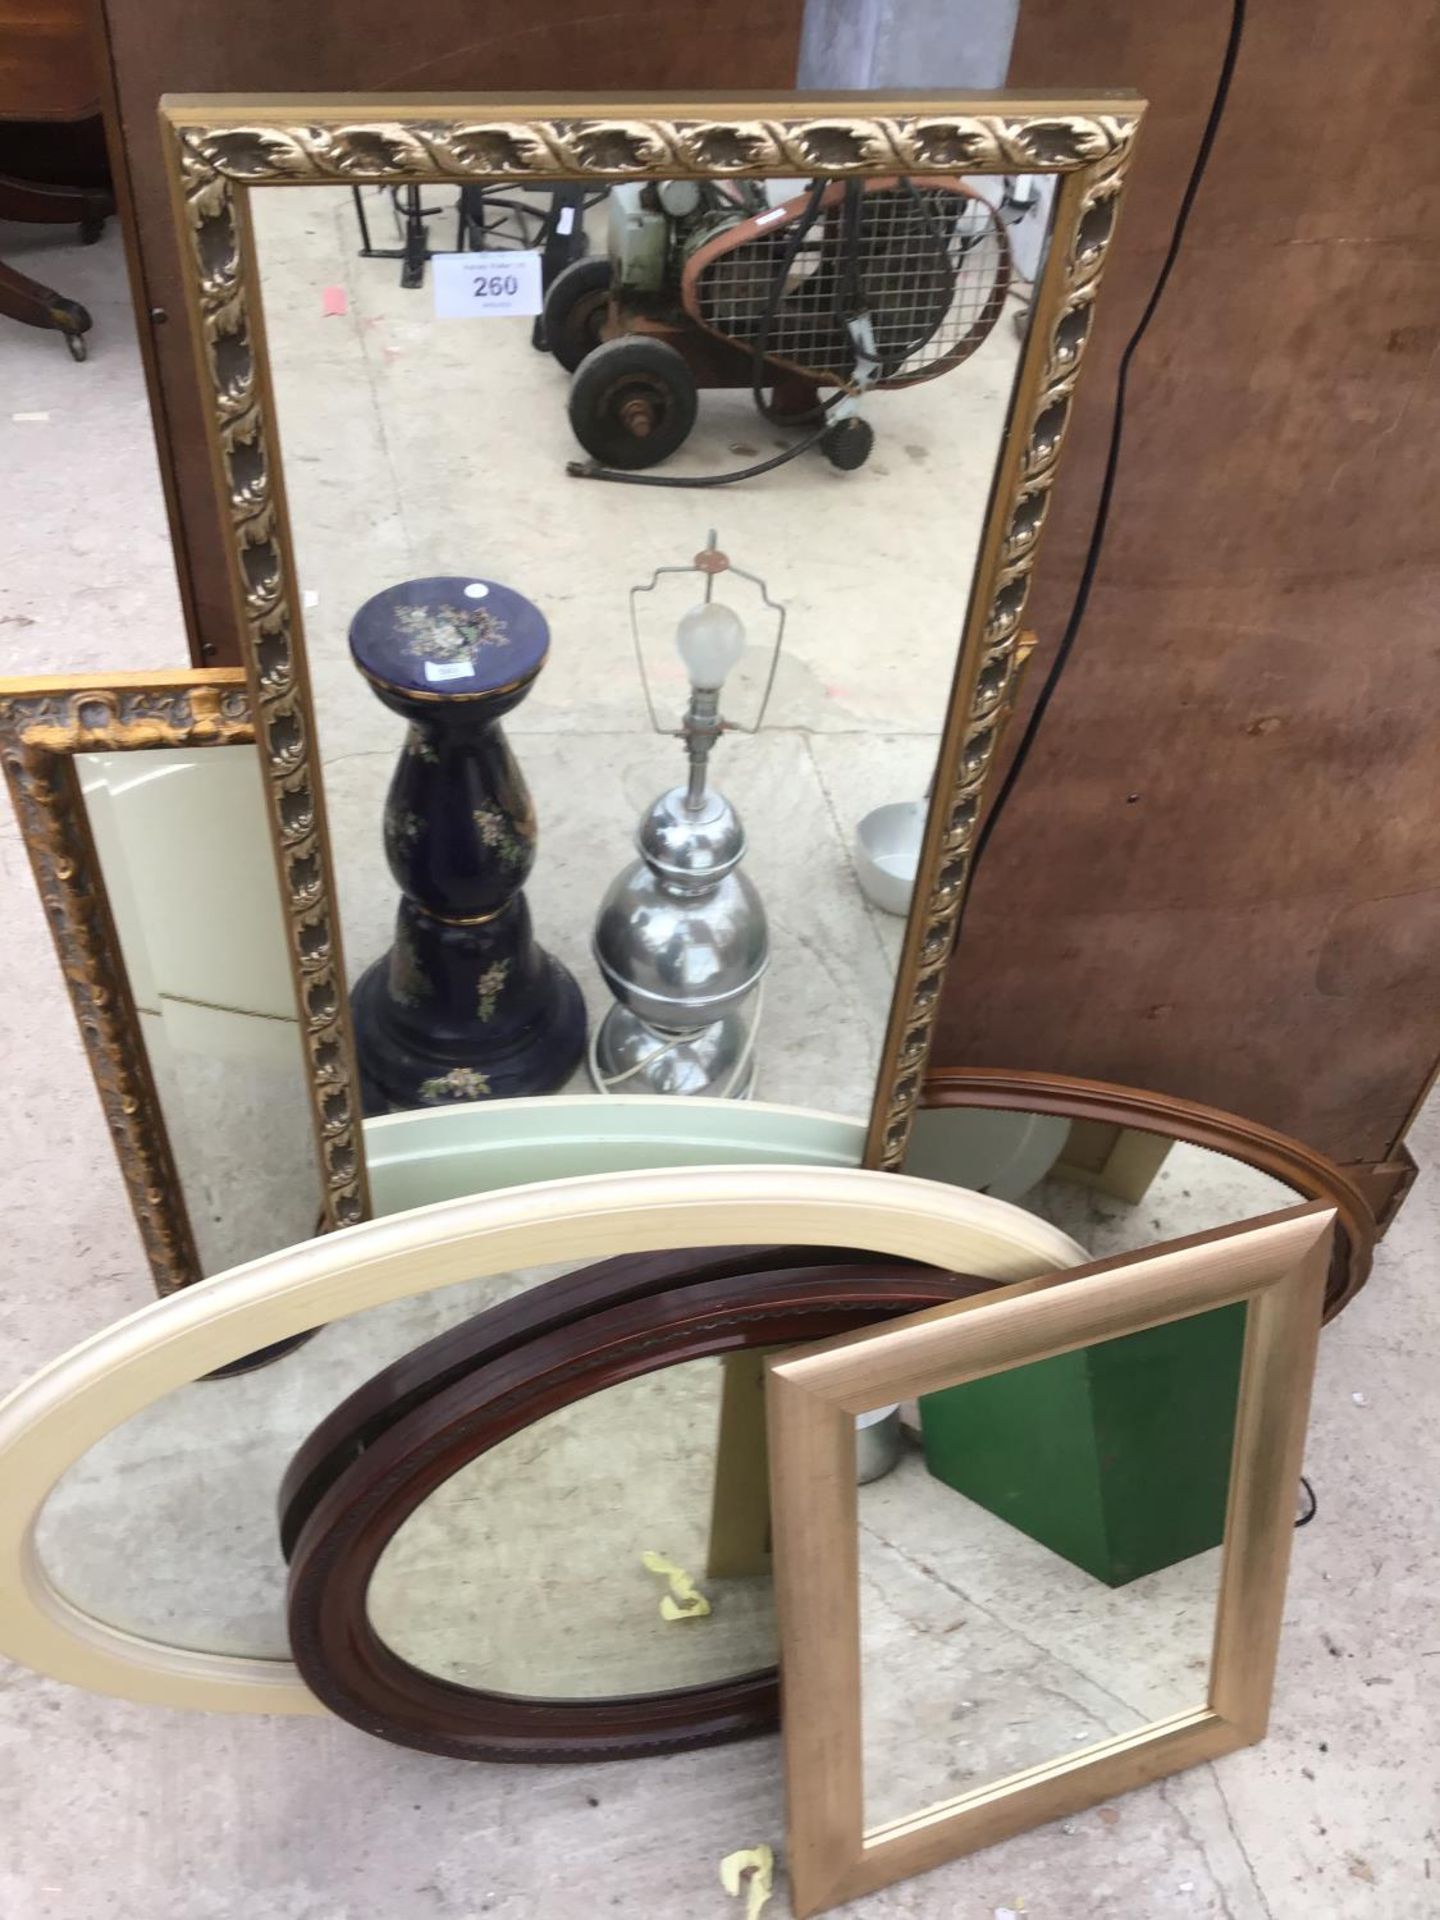 SIX VARIOUS FRAMED MIRRORS